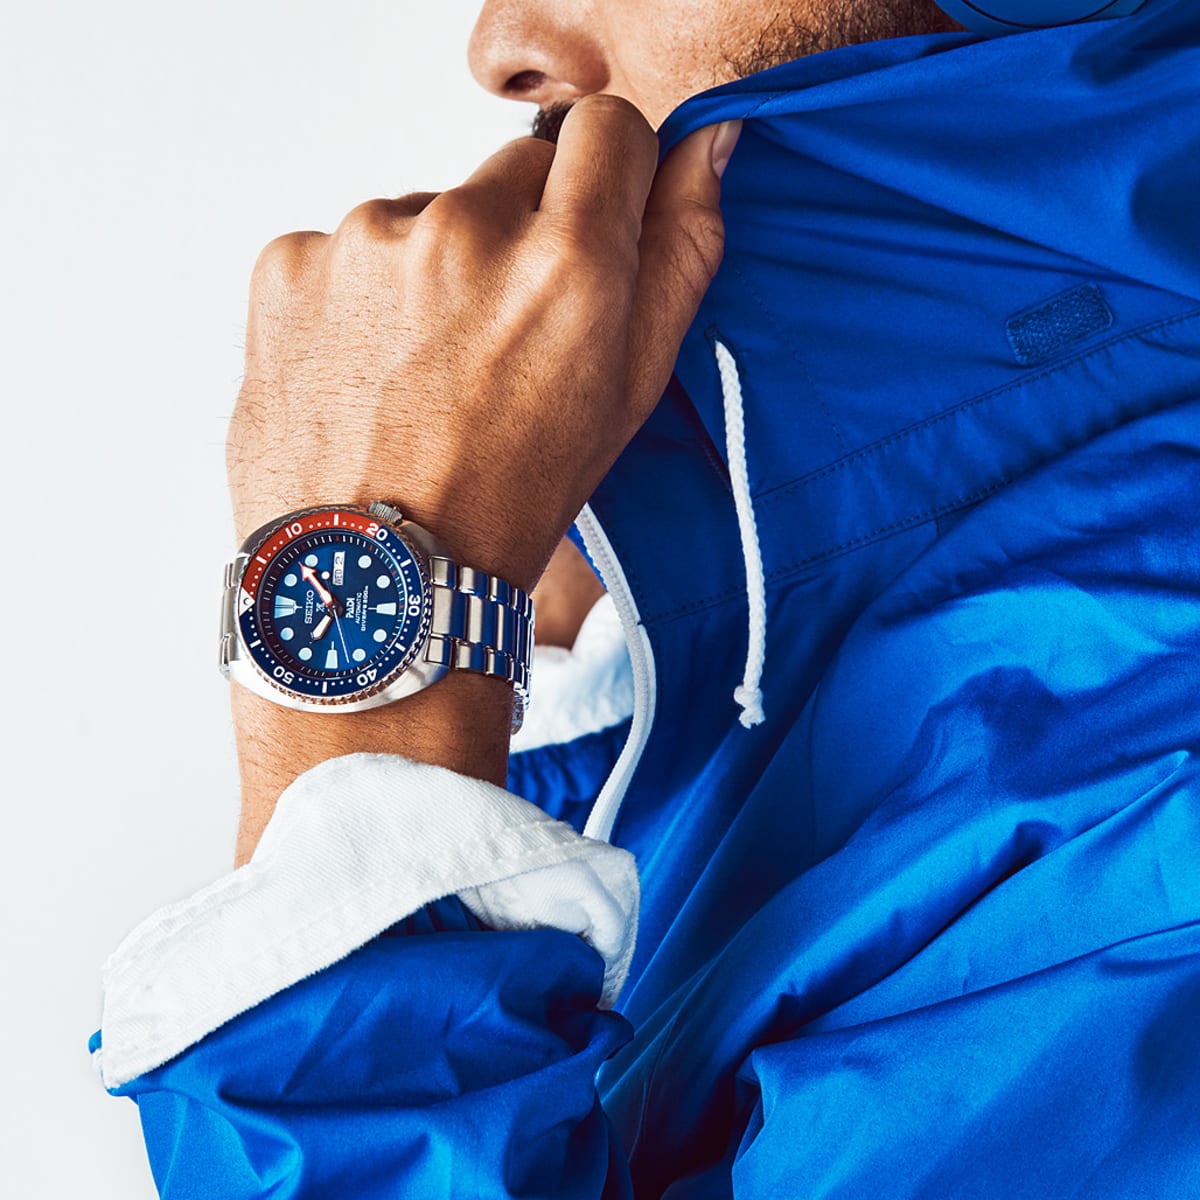 3 Ways to Wear Men's Jewelry—by a Guy Who Knows